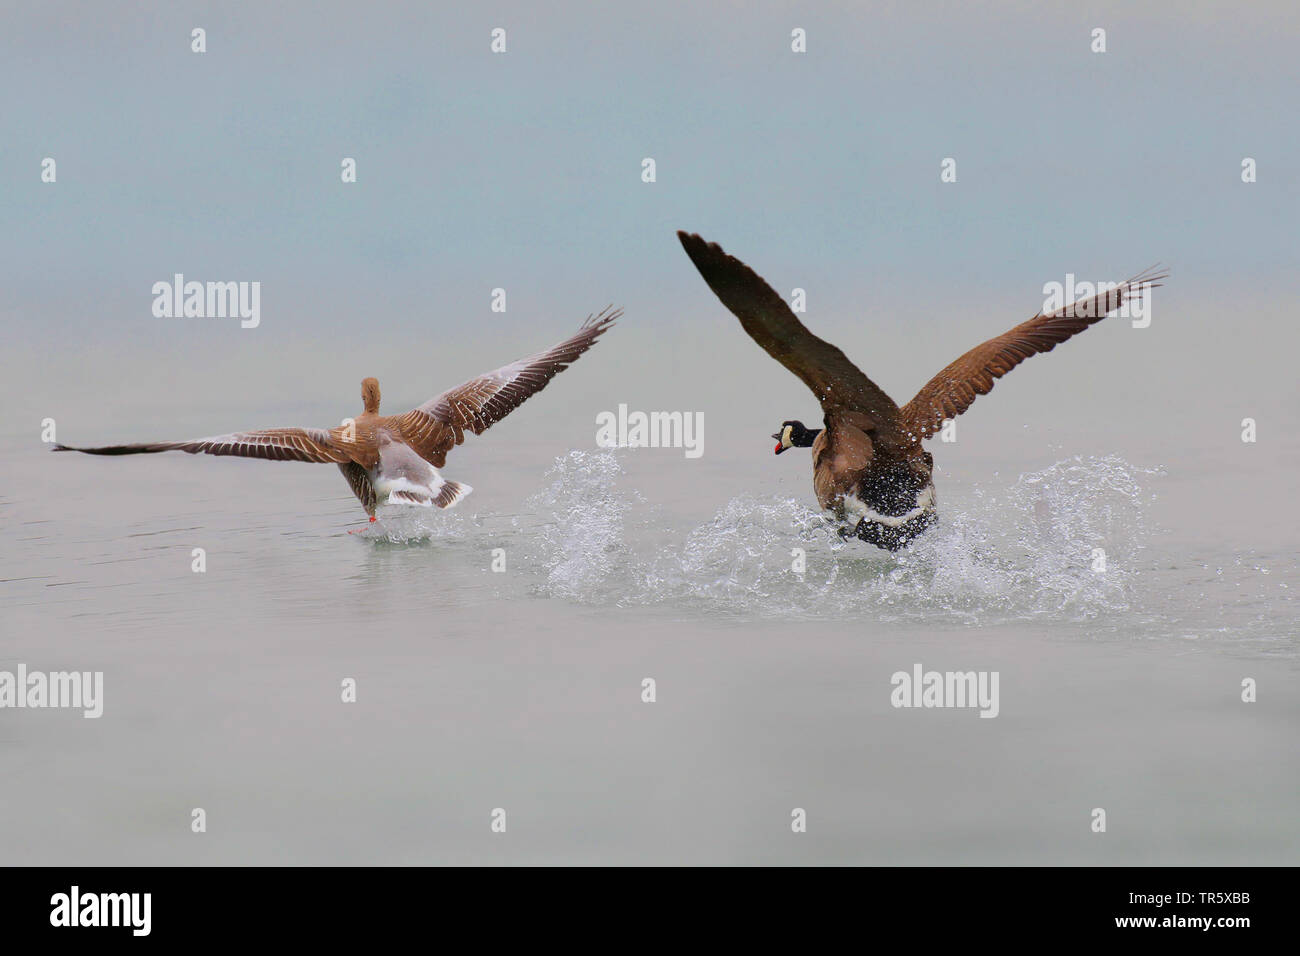 Canada goose (Branta canadensis), chasing away a greylag goose on water, Germany Stock Photo